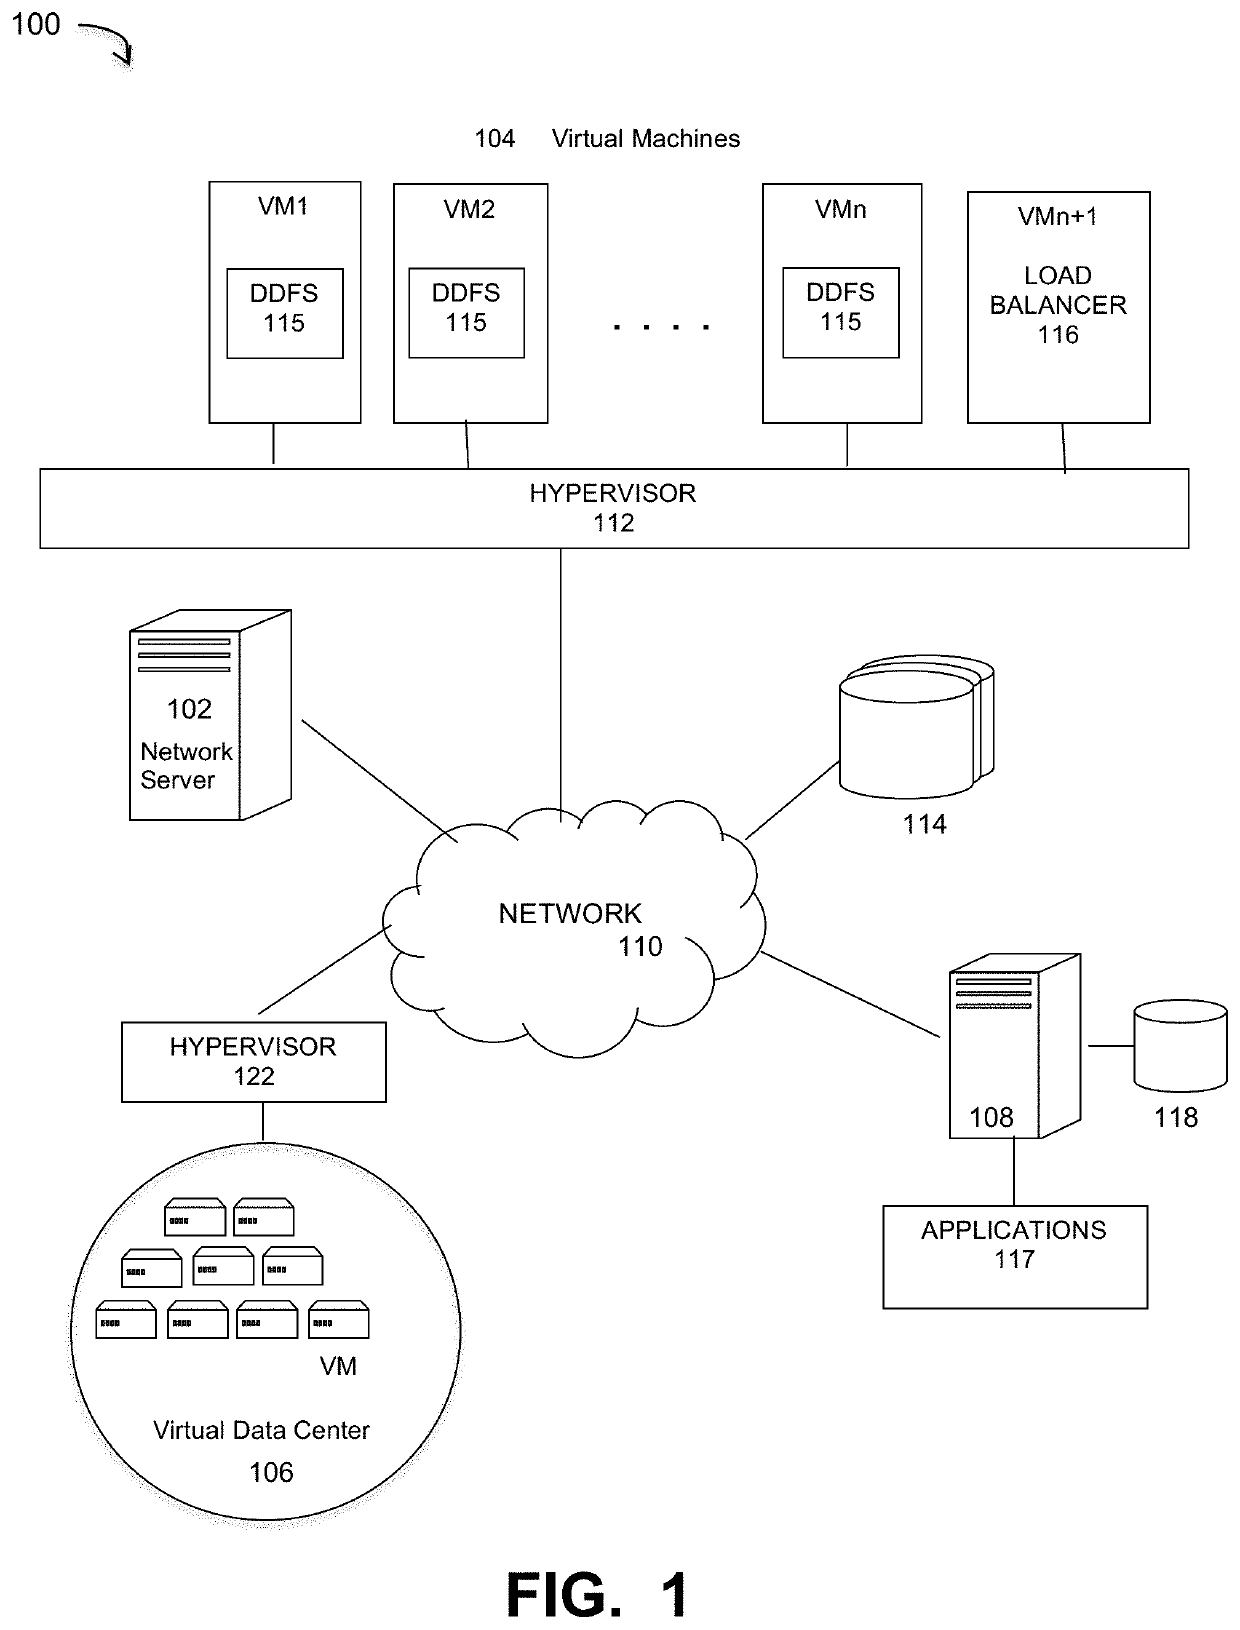 Scale out capacity load-balancing for backup appliances